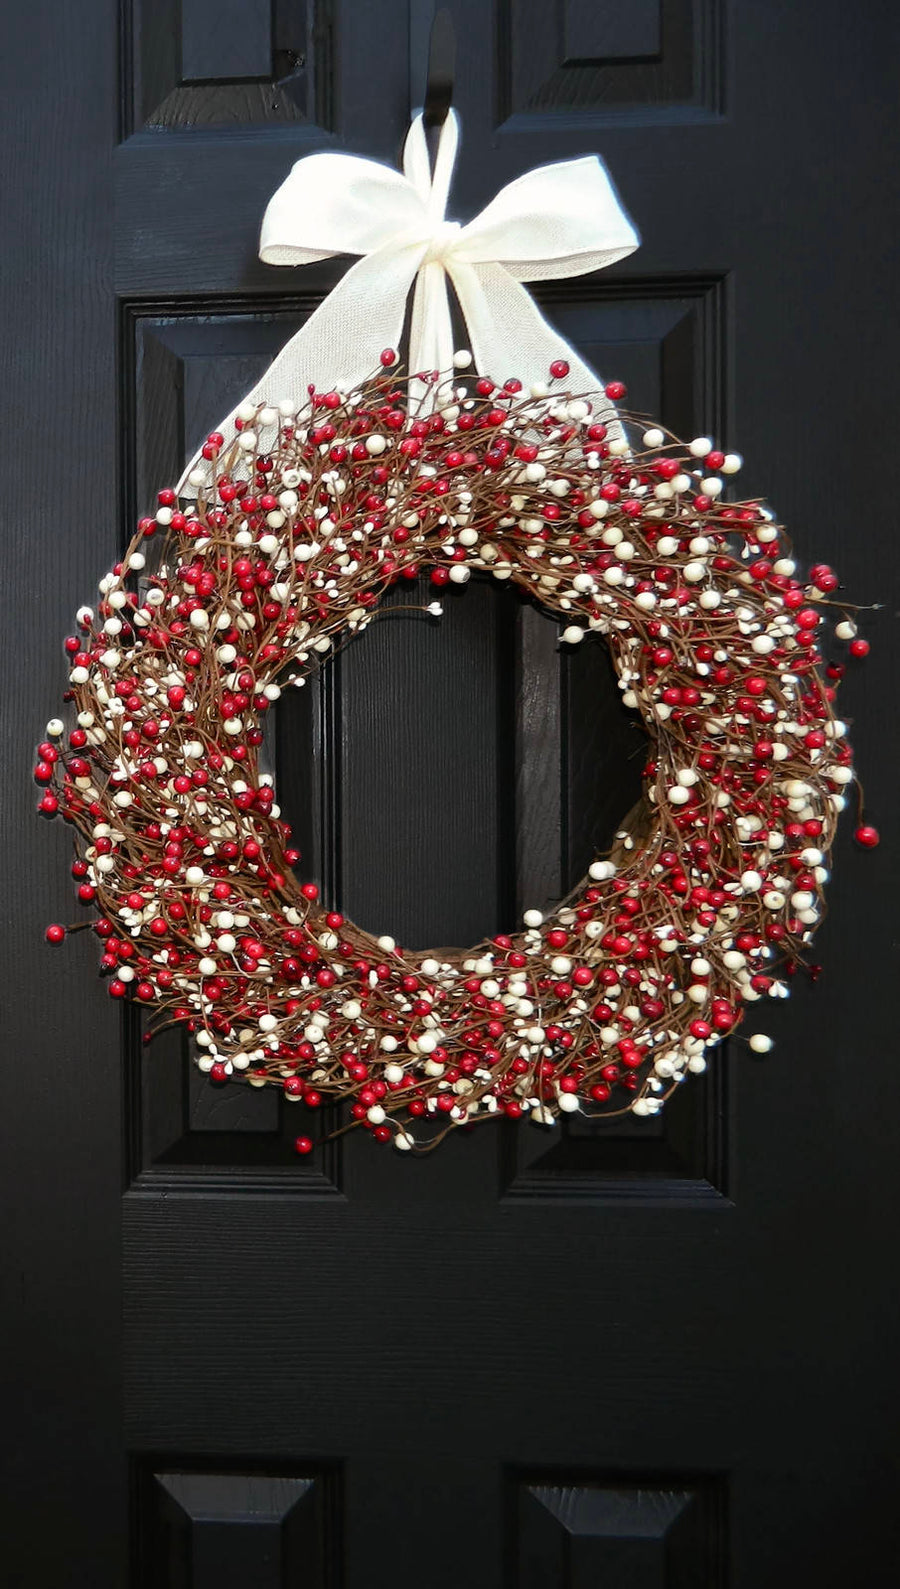 Red and Cream Berry Wreath with Bow